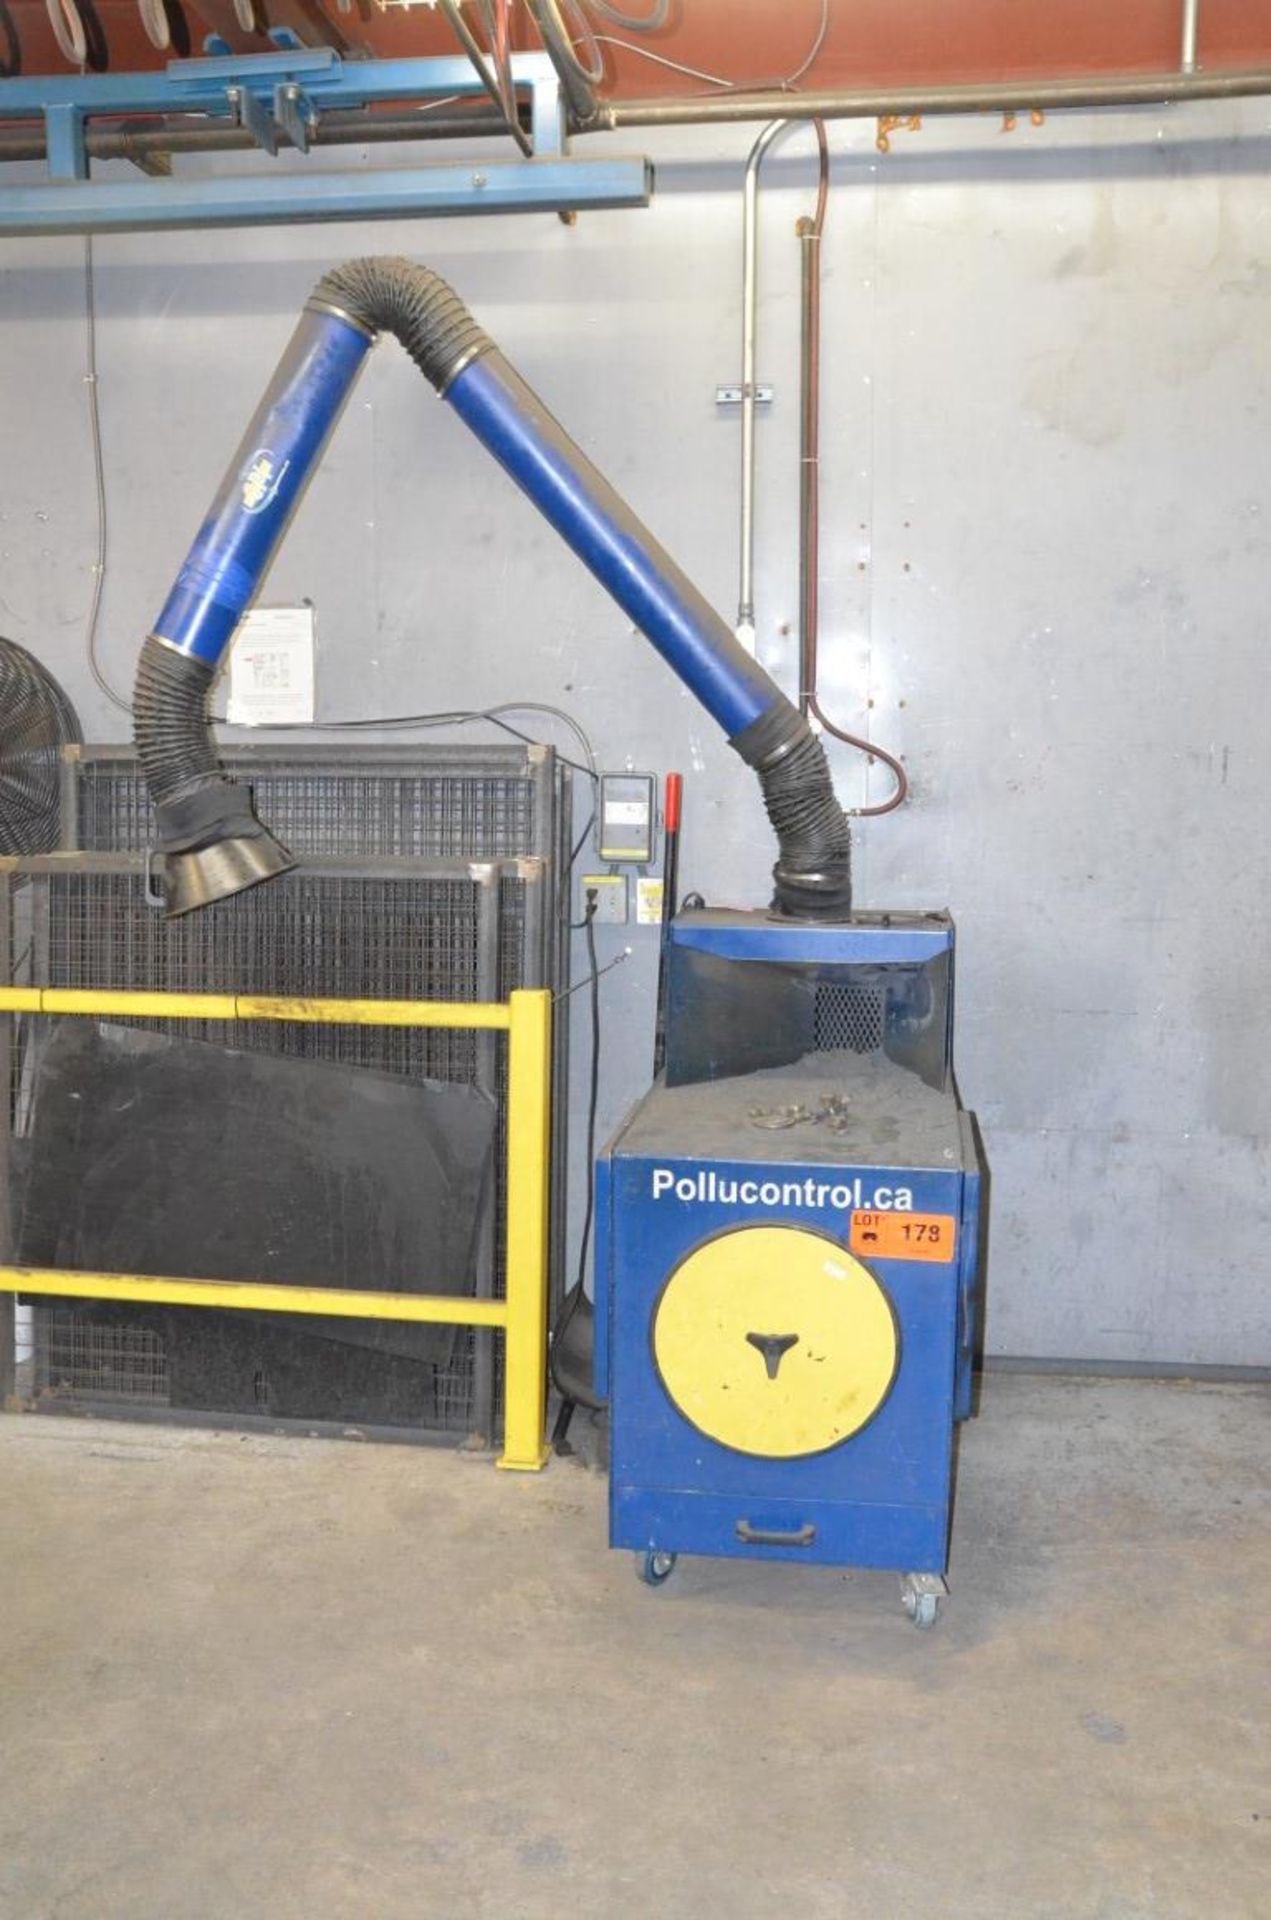 CPI POLLUCONTROL PORTABLE WELDING FUME EXTRACTOR, S/N N/A